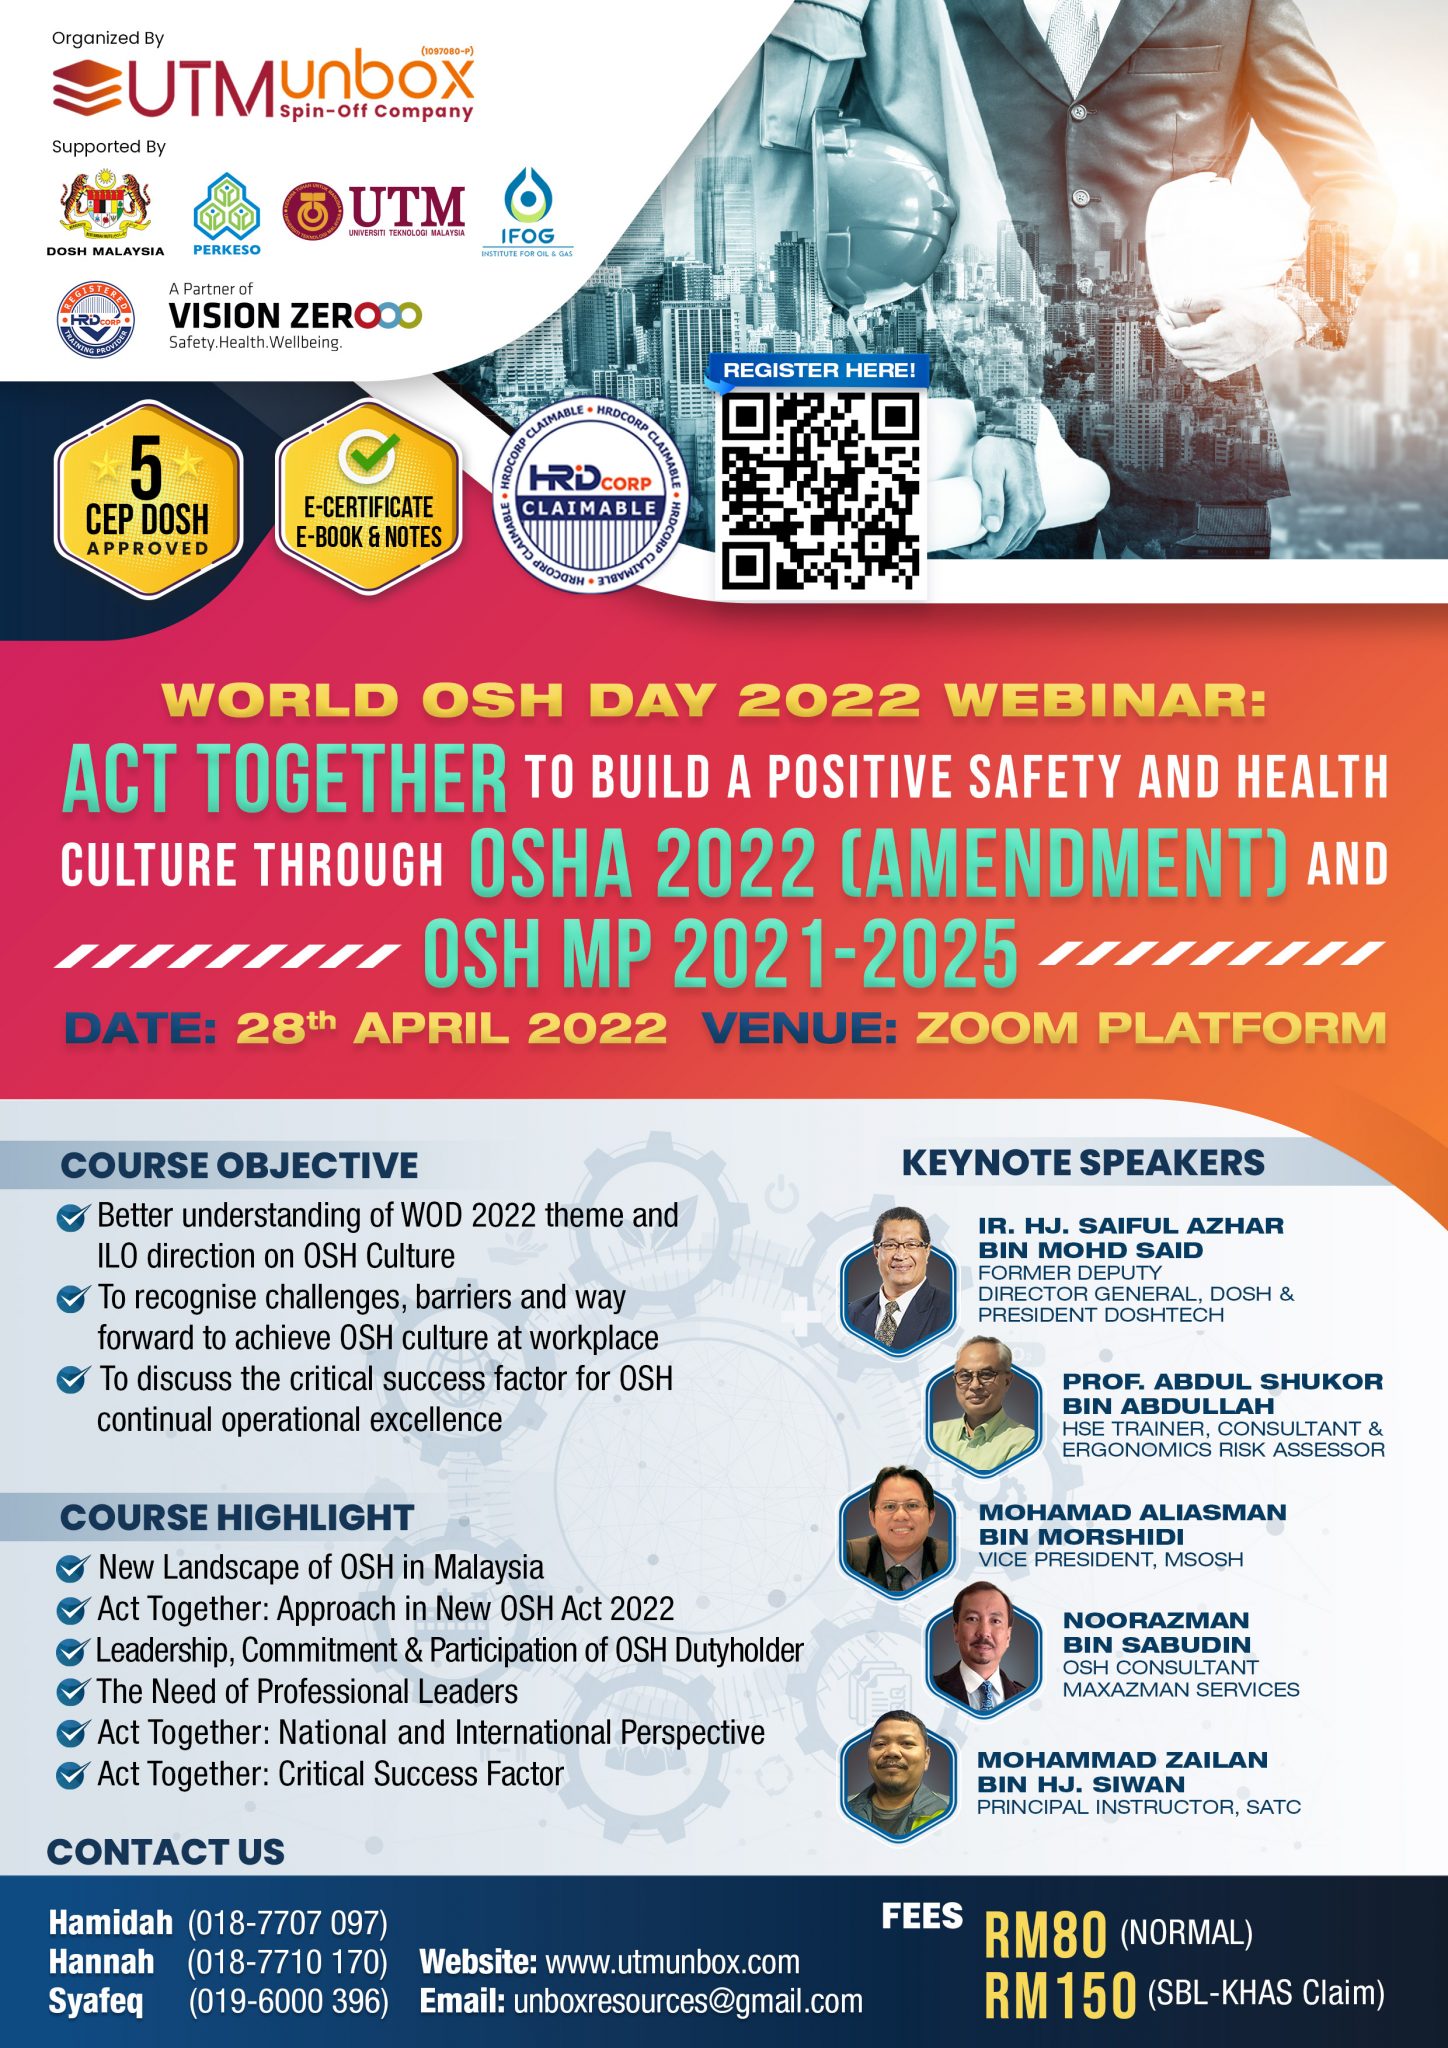 WORLD OSH DAY 2022 WEBINAR ACT TOGETHER TO BUILD A POSITIVE SAFETY AND